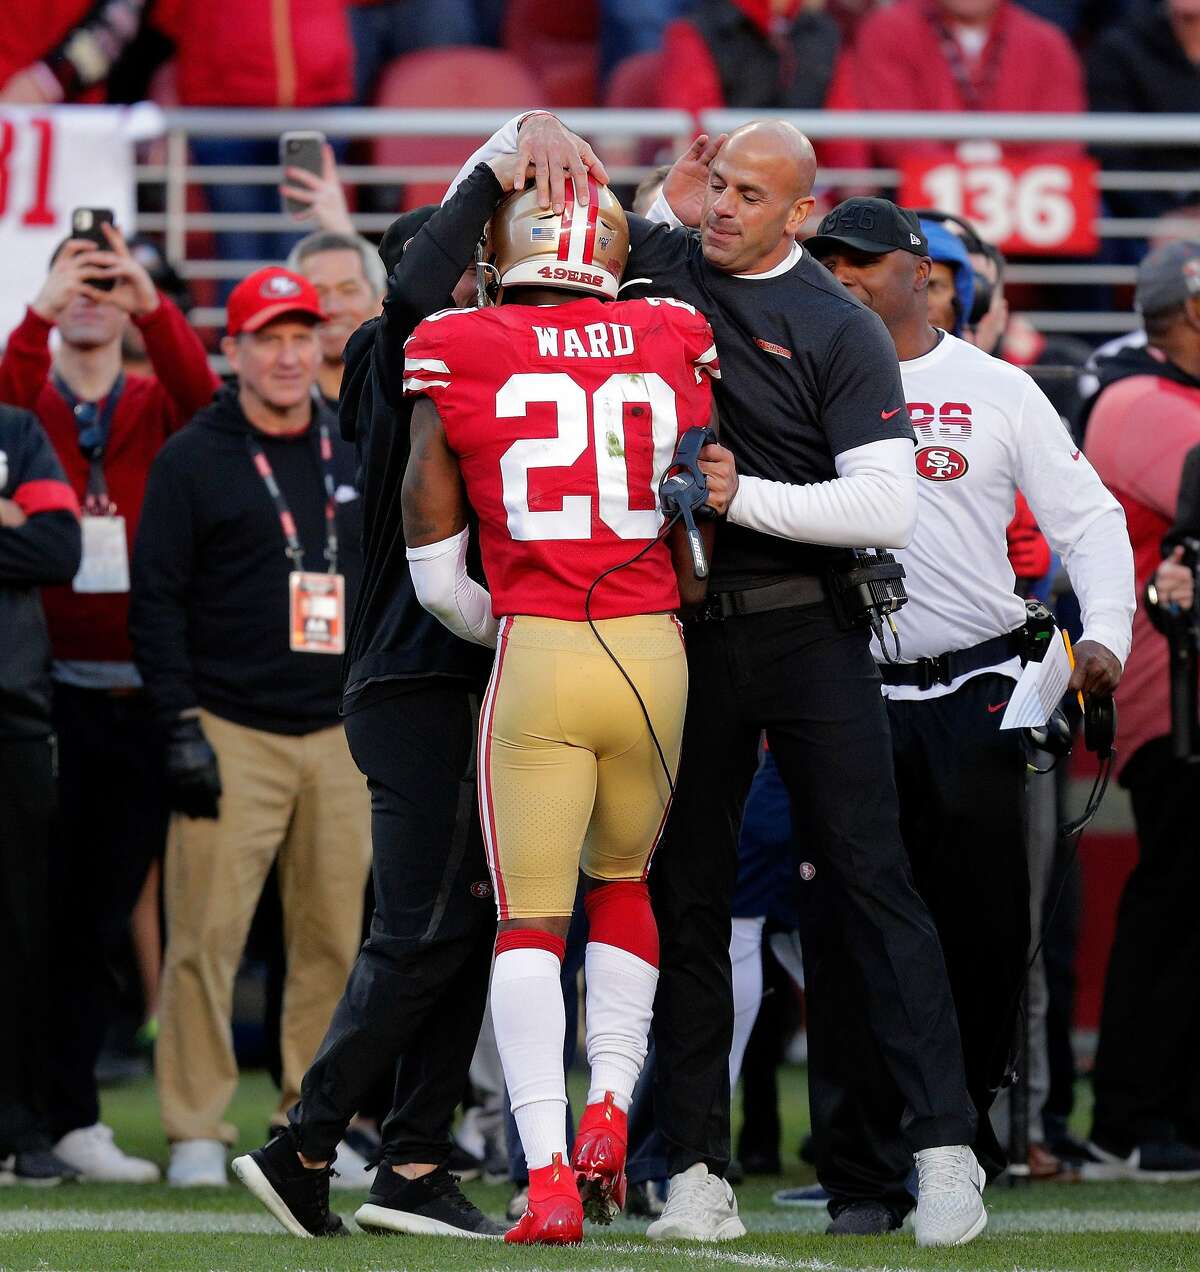 Defensive coordinator Robert Saleh hugs Jimmie Ward (20) after he broke up a pass late in the fourth quarter as the San Francisco 49ers played the Minnesota Vikings in the NFC Divisional Round playoff game at Levi’s Stadium in Santa Clara, Calif., on Saturday, January 11, 2020. The 49ers defeated the Vikings to advance to the NFC Championship game.